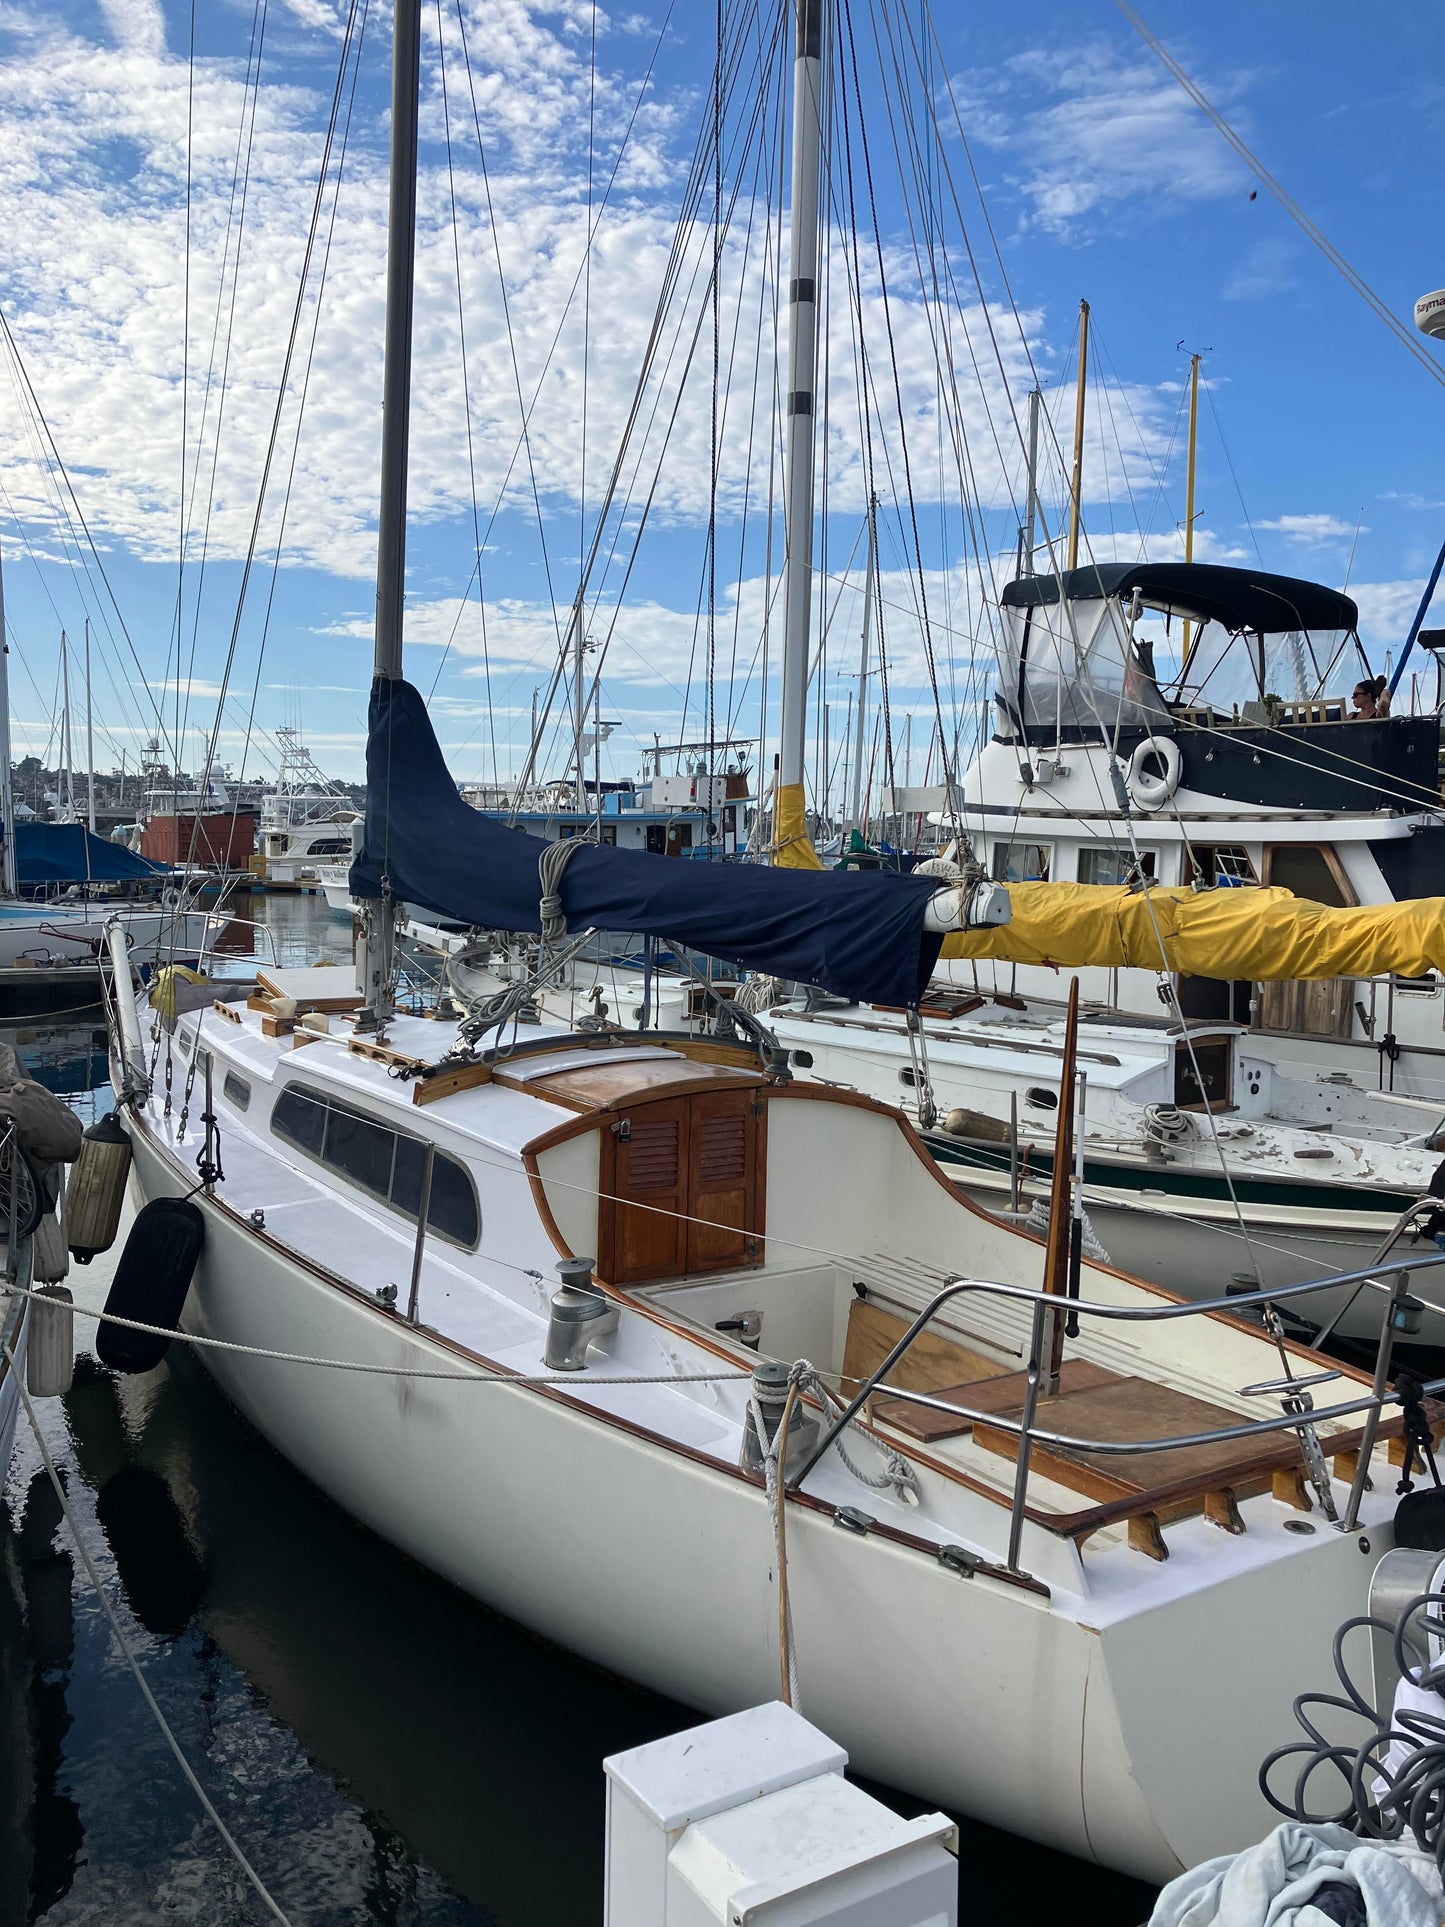 1969 Jim Young New Zealand 37' Sloop Located on Shelter Island, San Diego, Ca